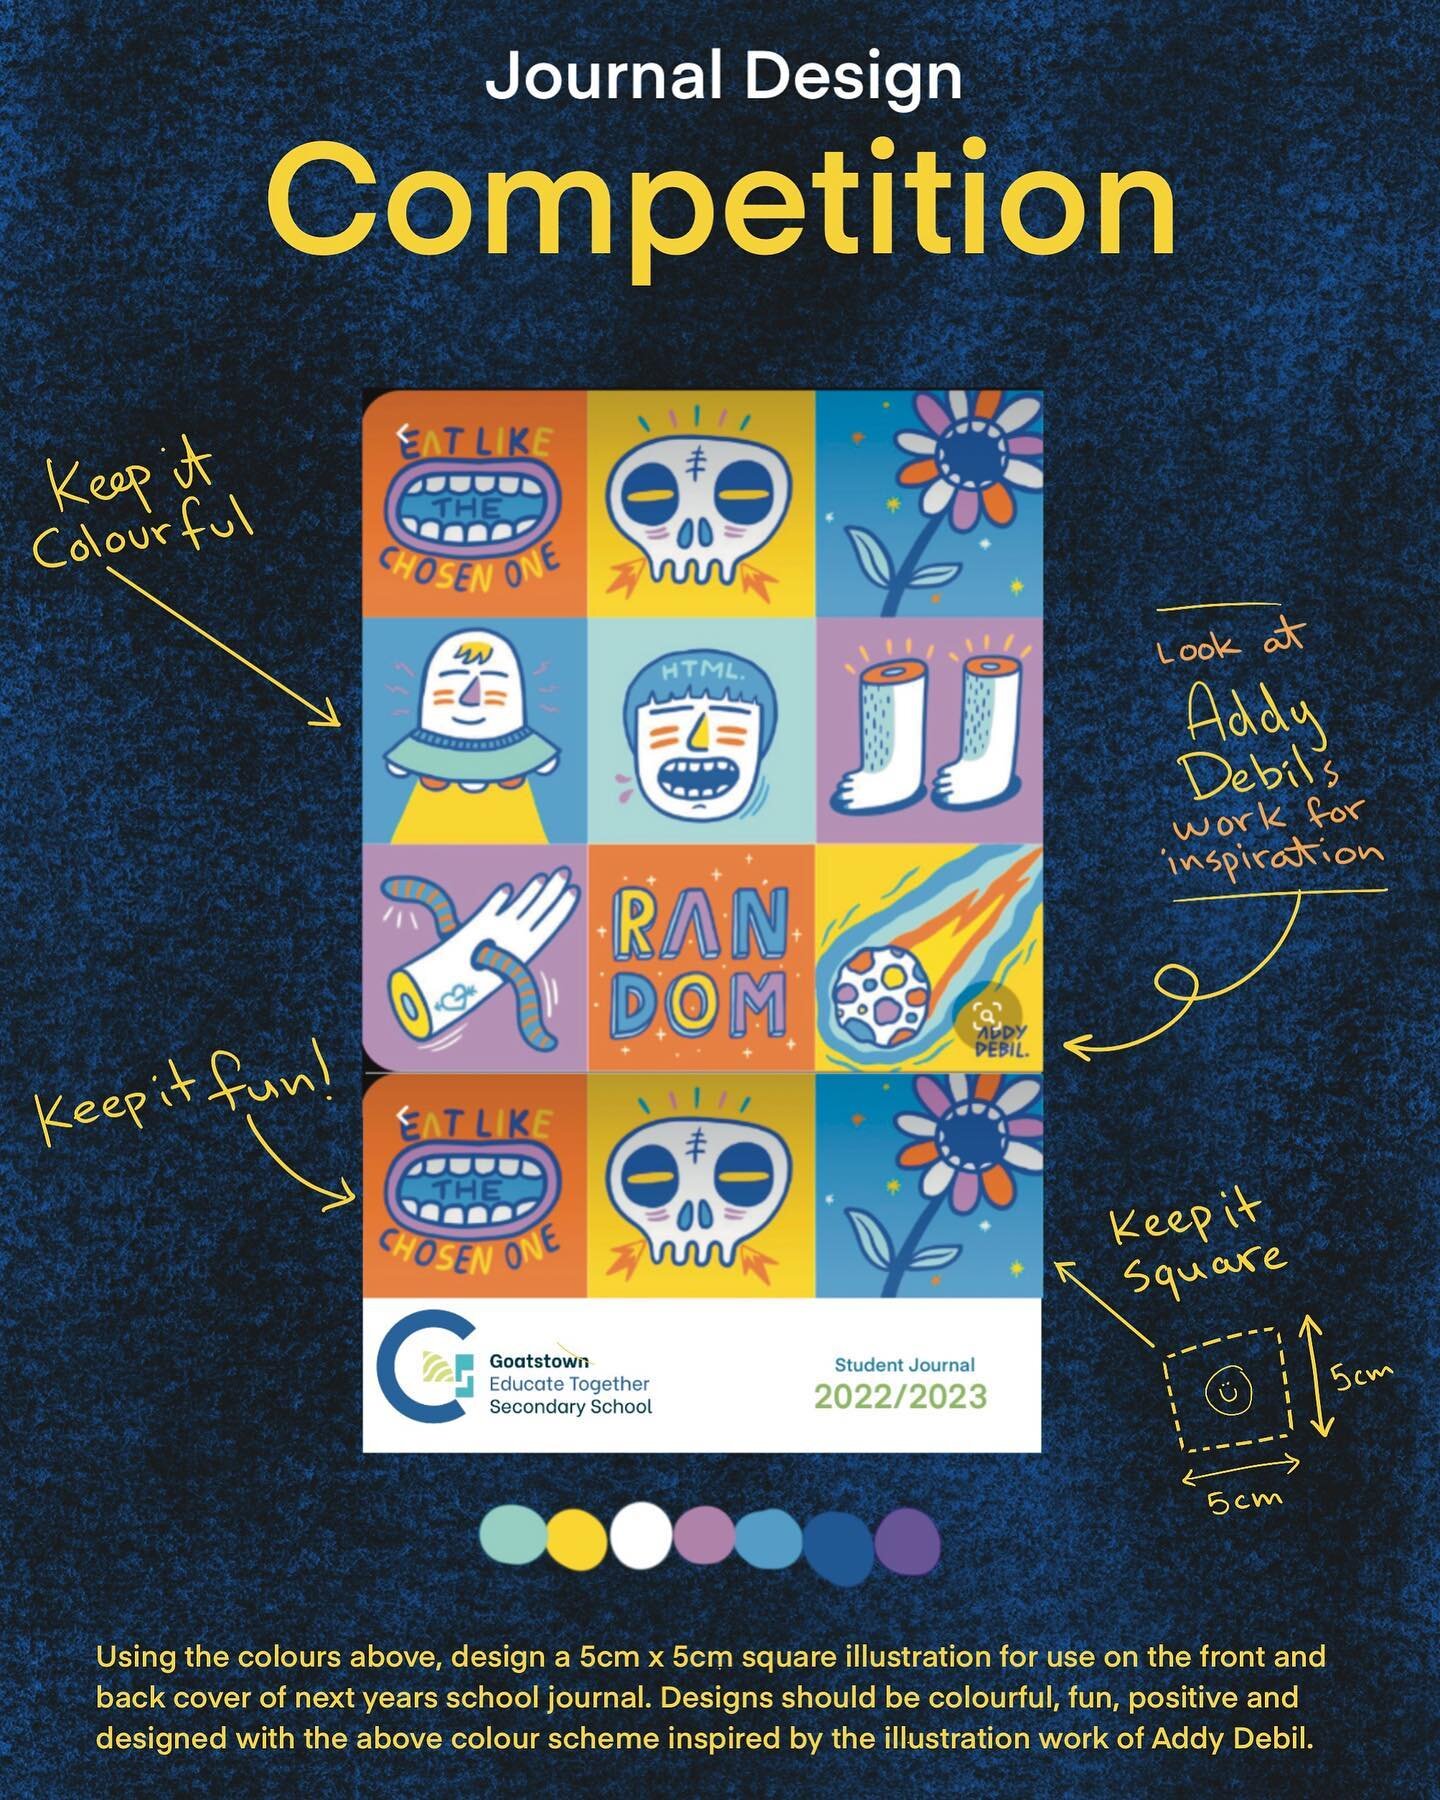 Good morning folks,
Our Journal is being designed and we would like to include student artwork on the cover. Have a look at the poster above for details. 

Send all artwork to noloughlin@goatstownetss.is  before 21/03/21 (next Monday) to be in with a